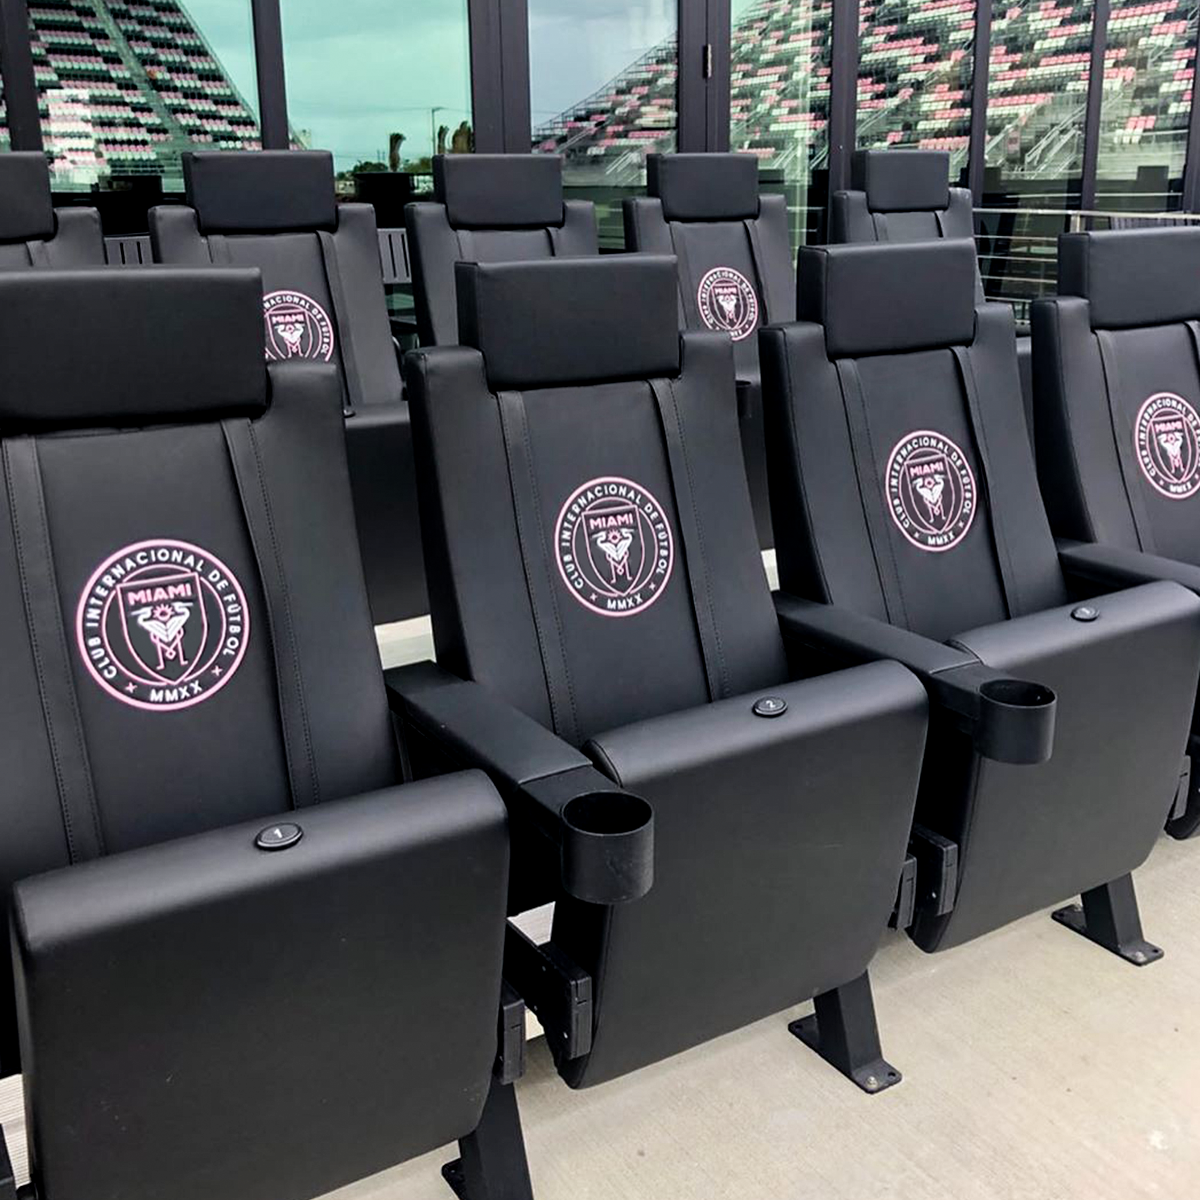 SuiteMax 3.5 VIP Seats with DC United FC Logo